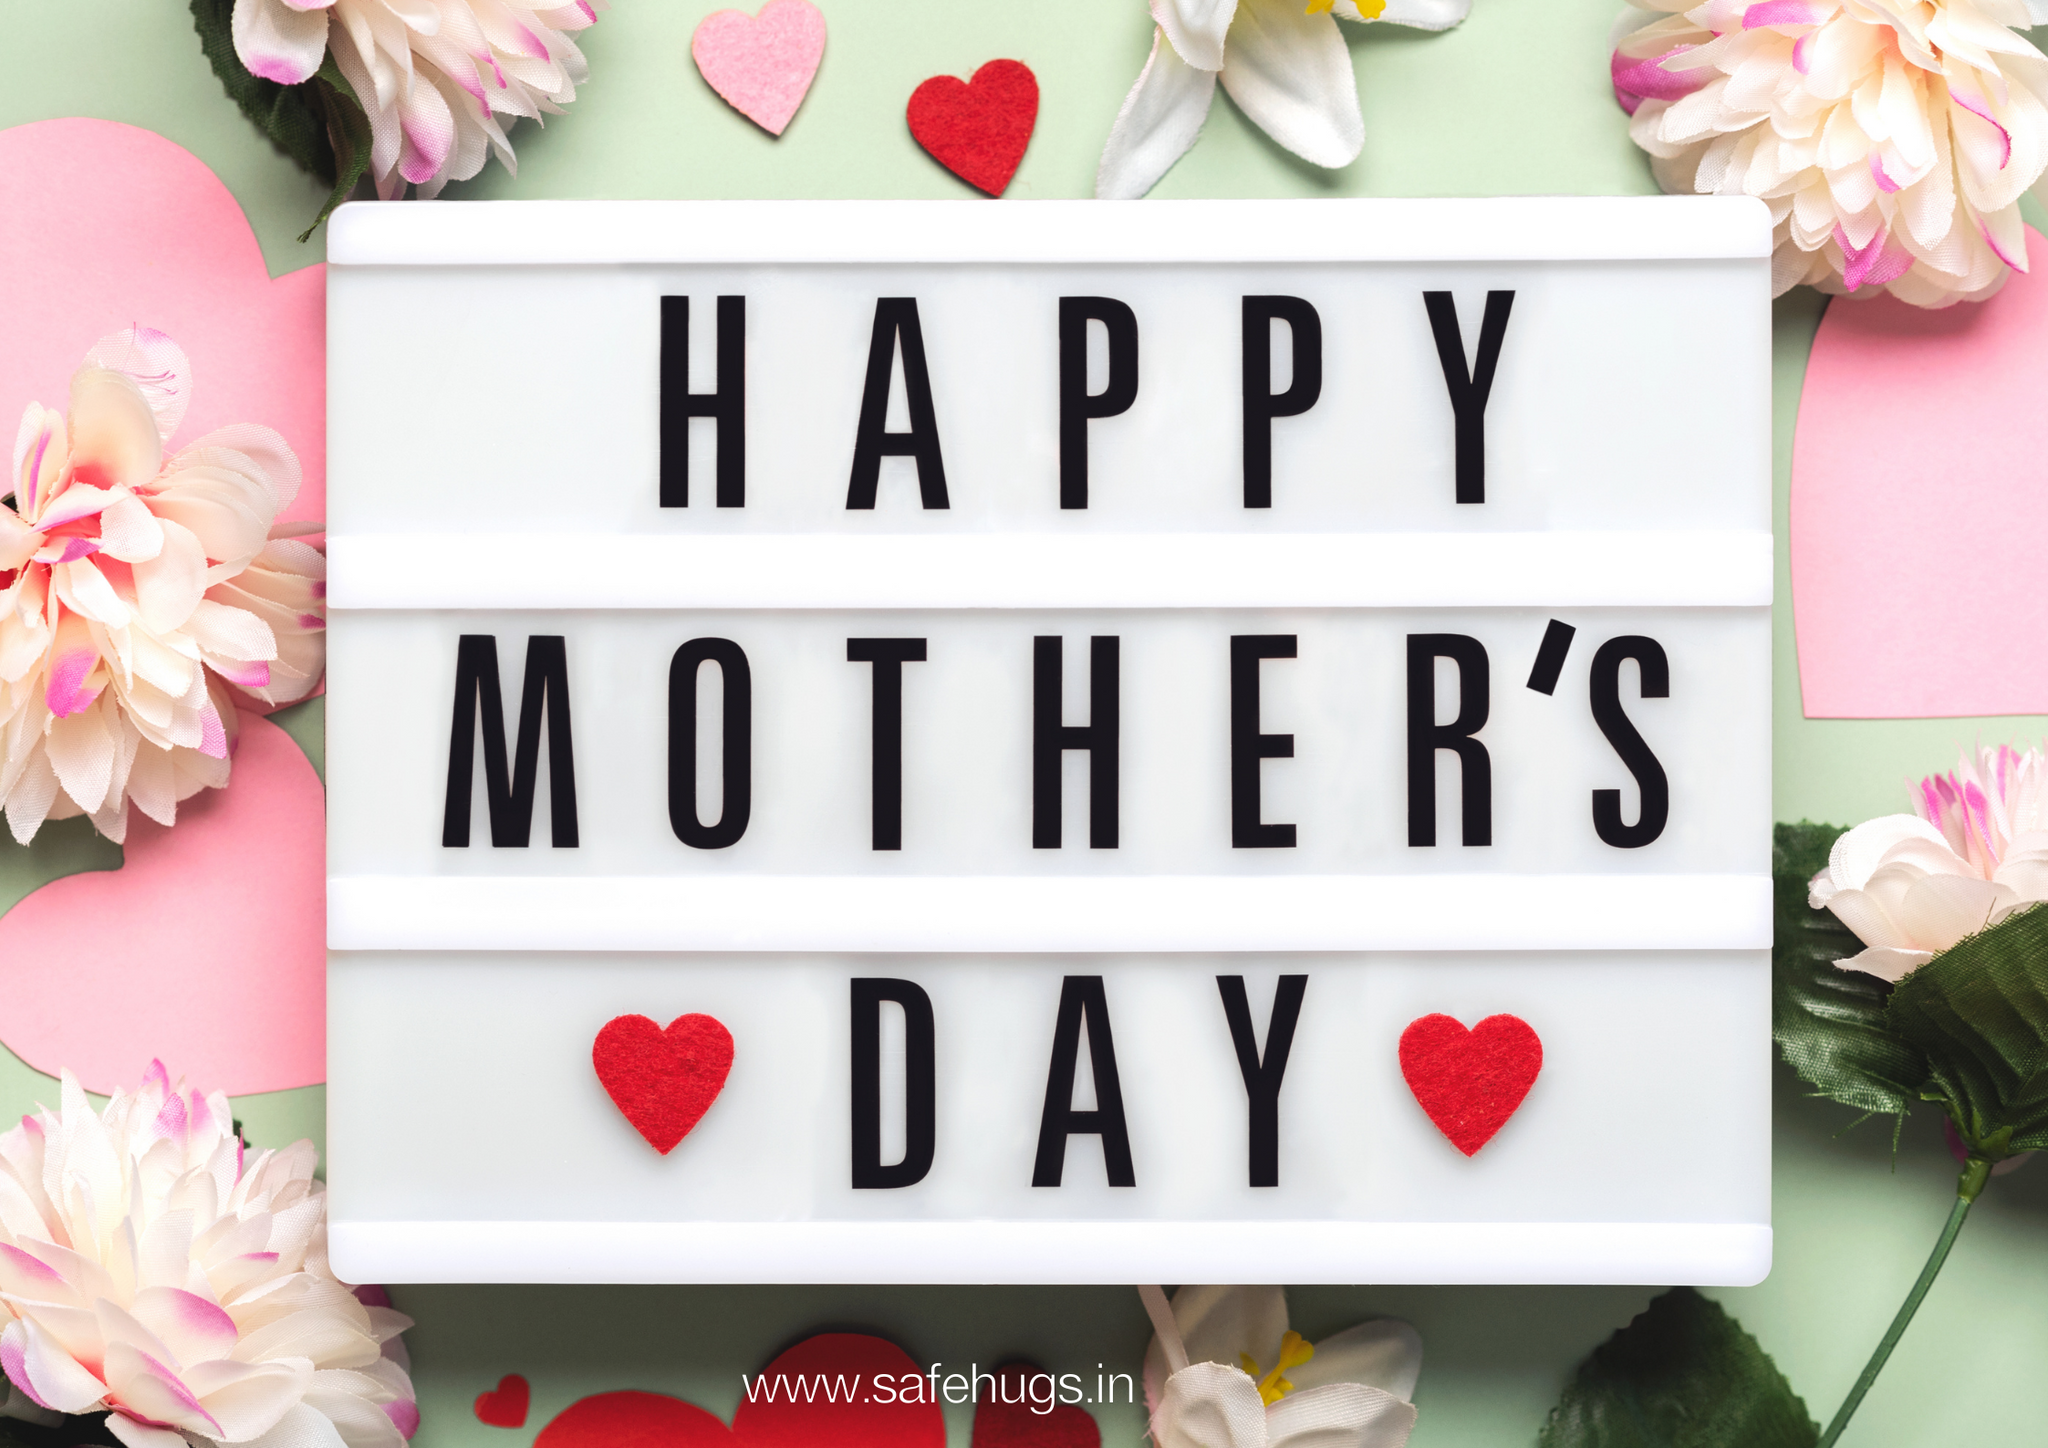 Happy Mother's Day poster